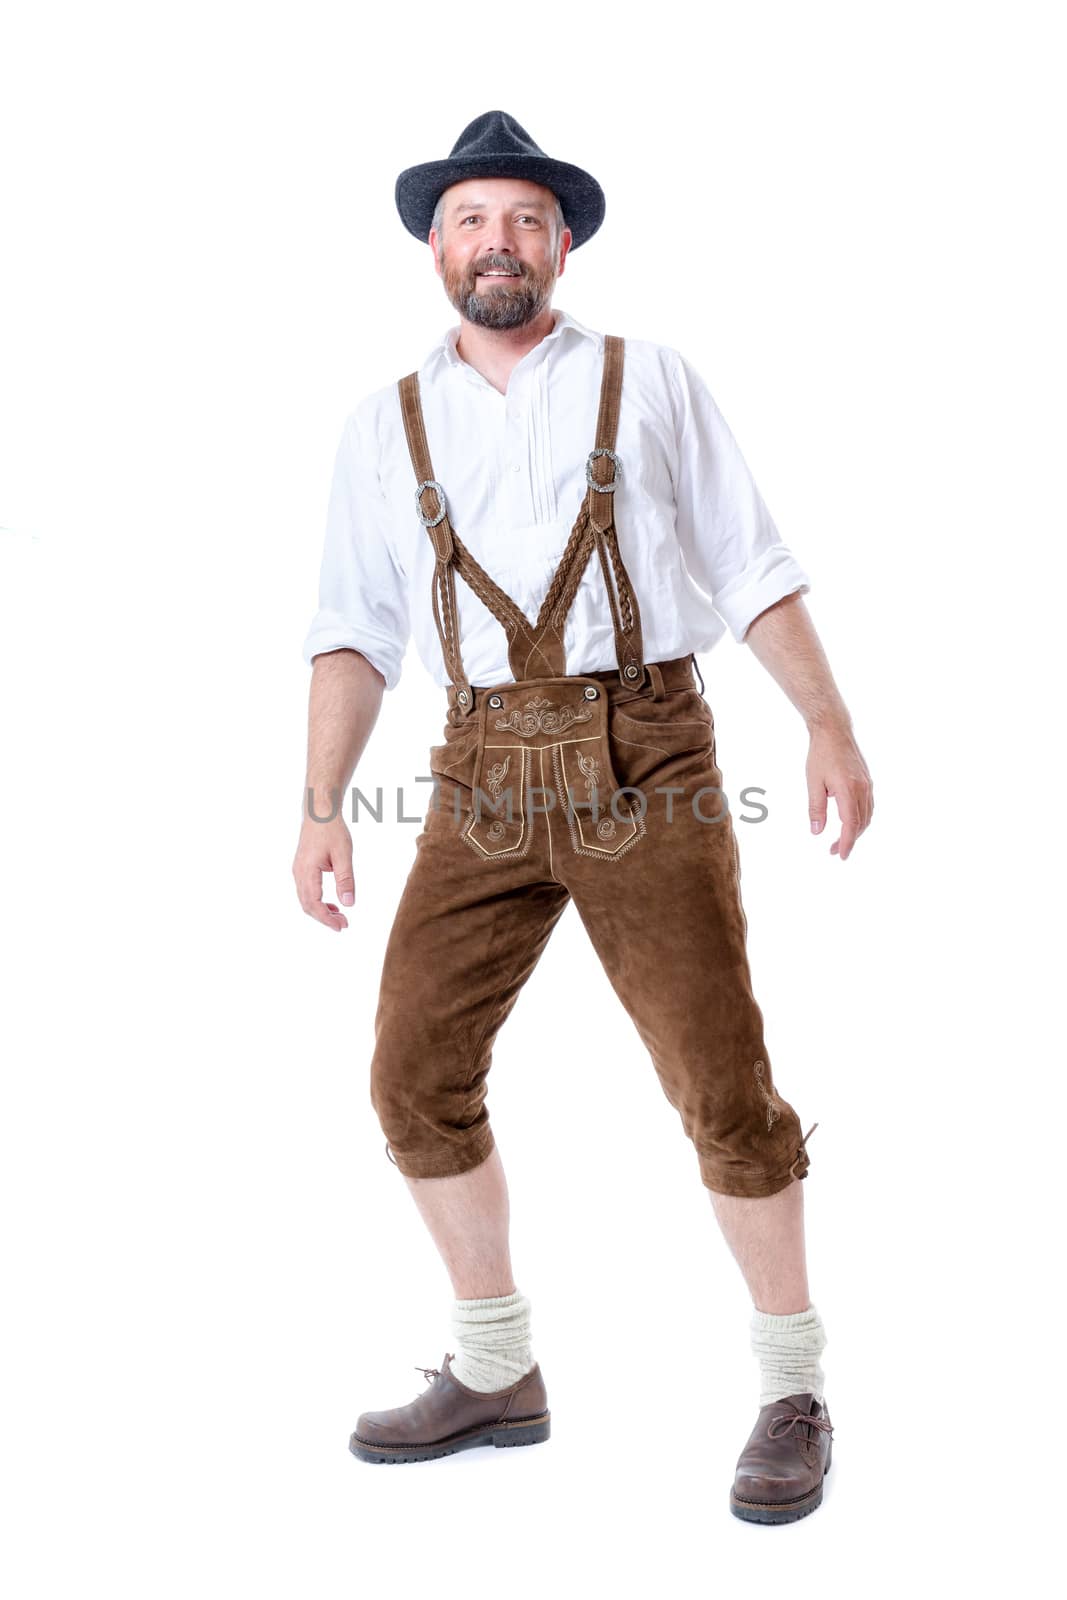 An image of a traditional bavarian man isolated on a white background